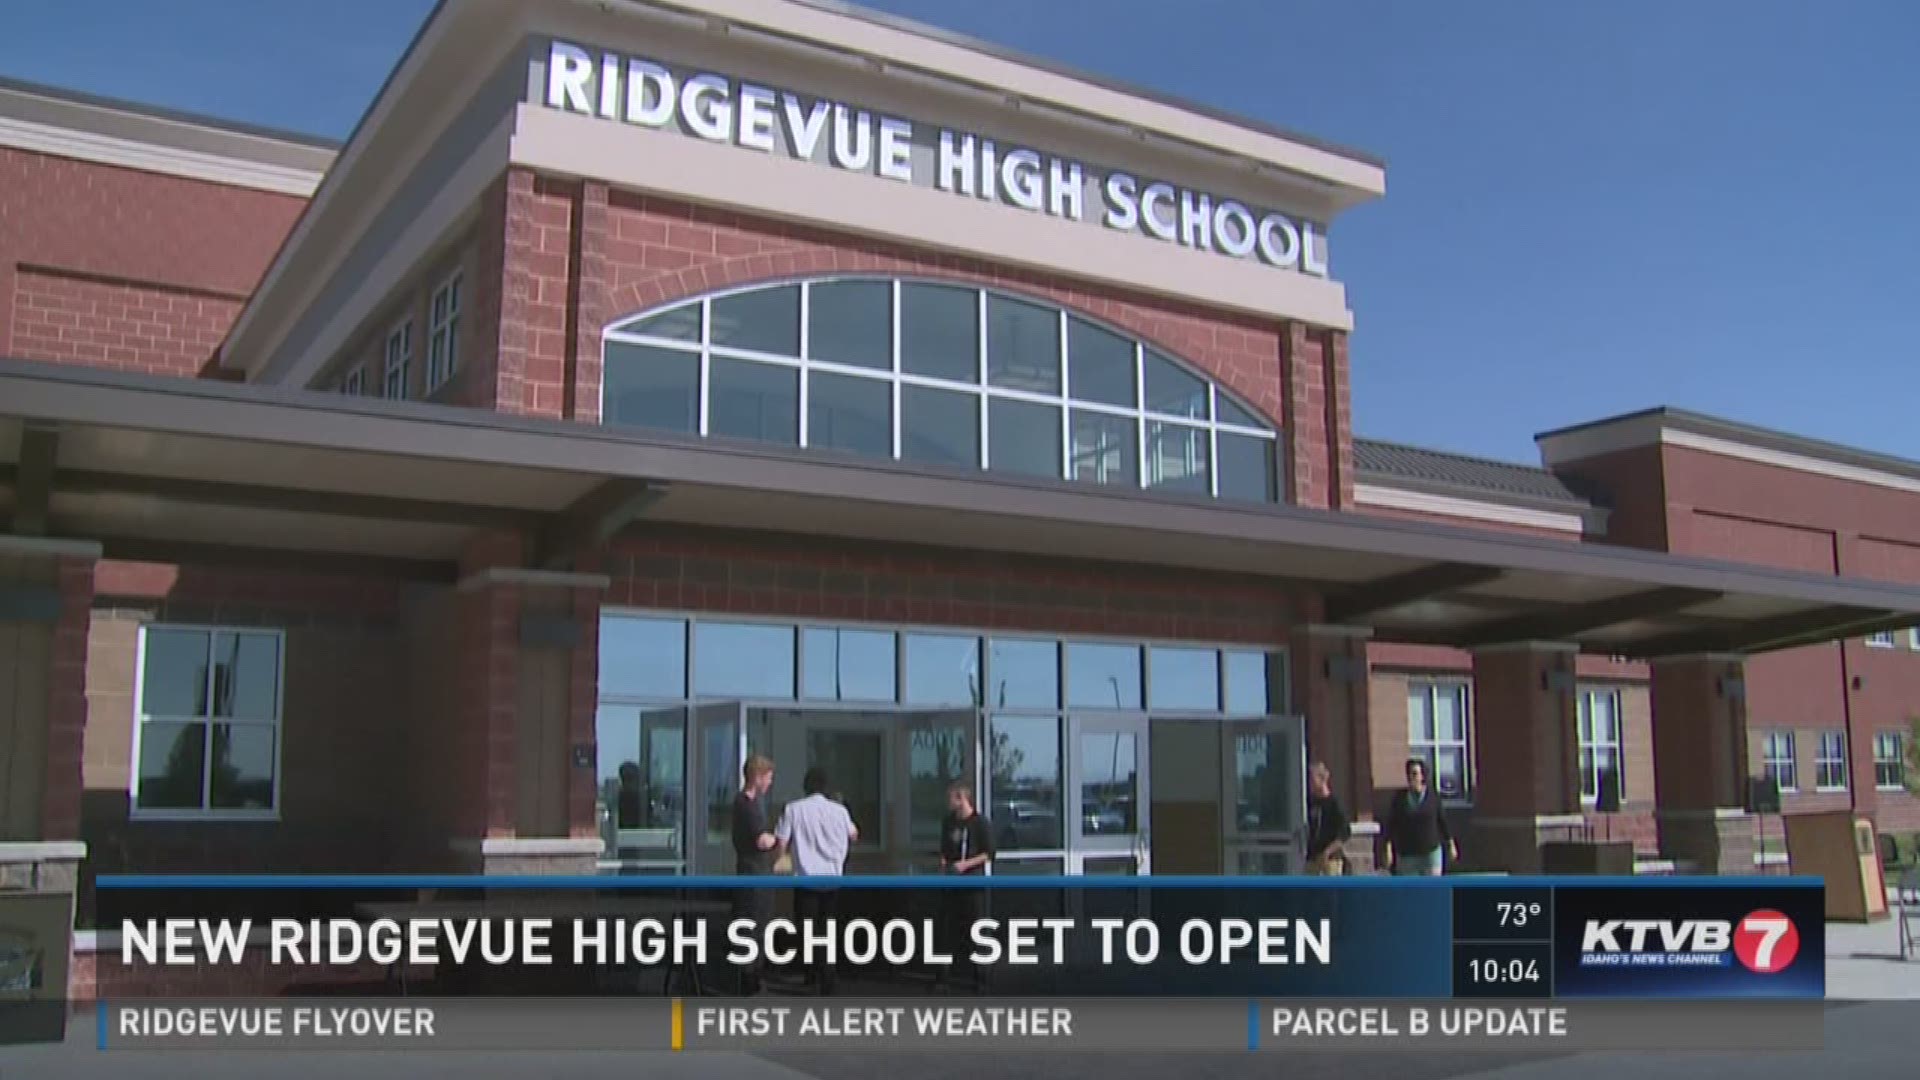 Ridgevue High School, the second high school in the Vallivue School District, will open Monday. It is at the intersection of Madison and Linden roads in Nampa.